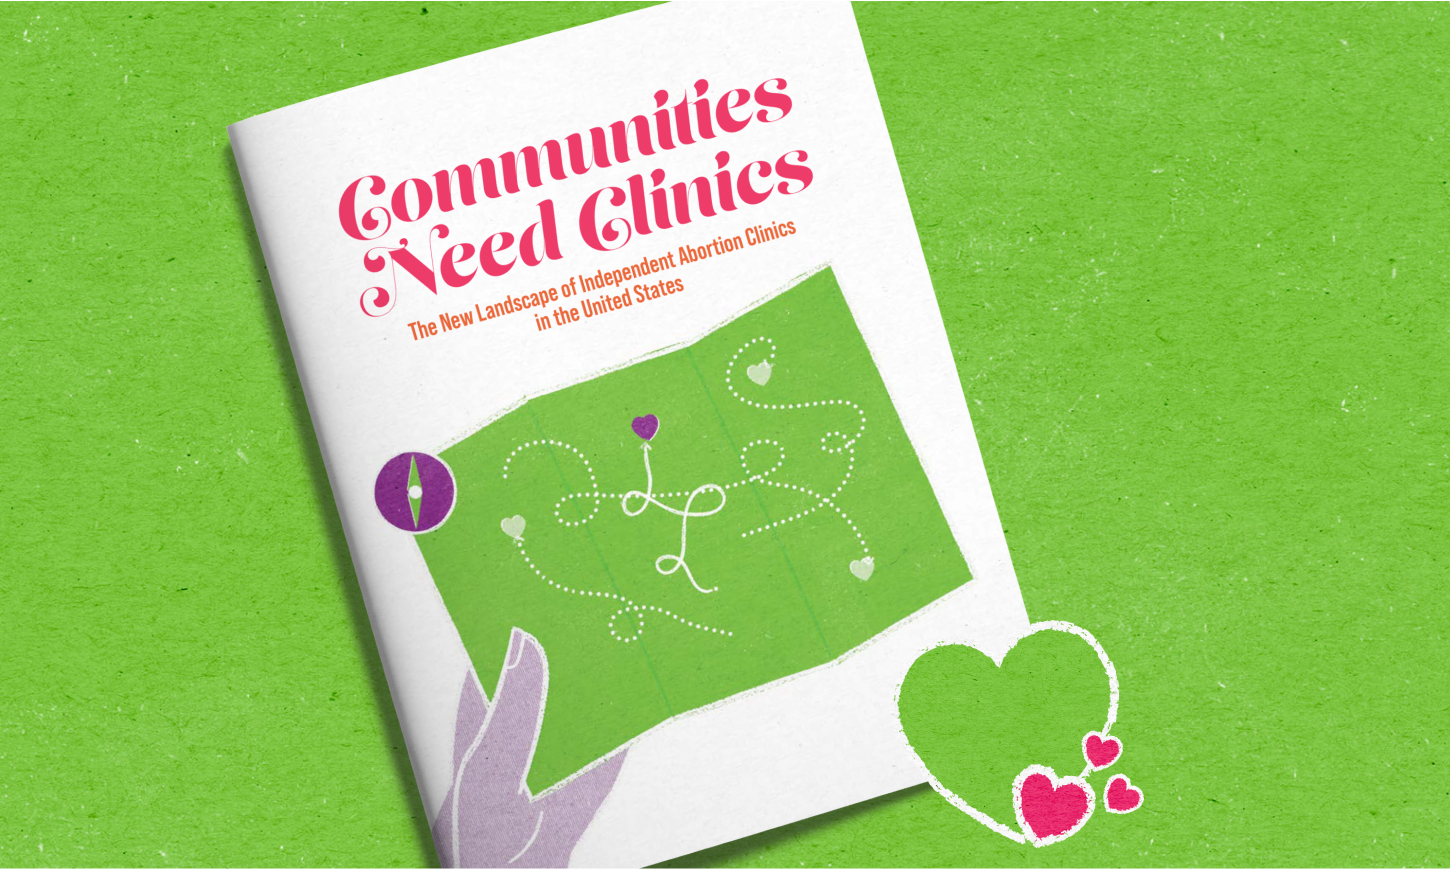 The cover of the Communities Need Clinics 2022 report with a line and flat shape illustration, with matchbook-like texture, depicting a hand holding a simple map of the US with hearts highlighting open clinics - mostly in northern states.